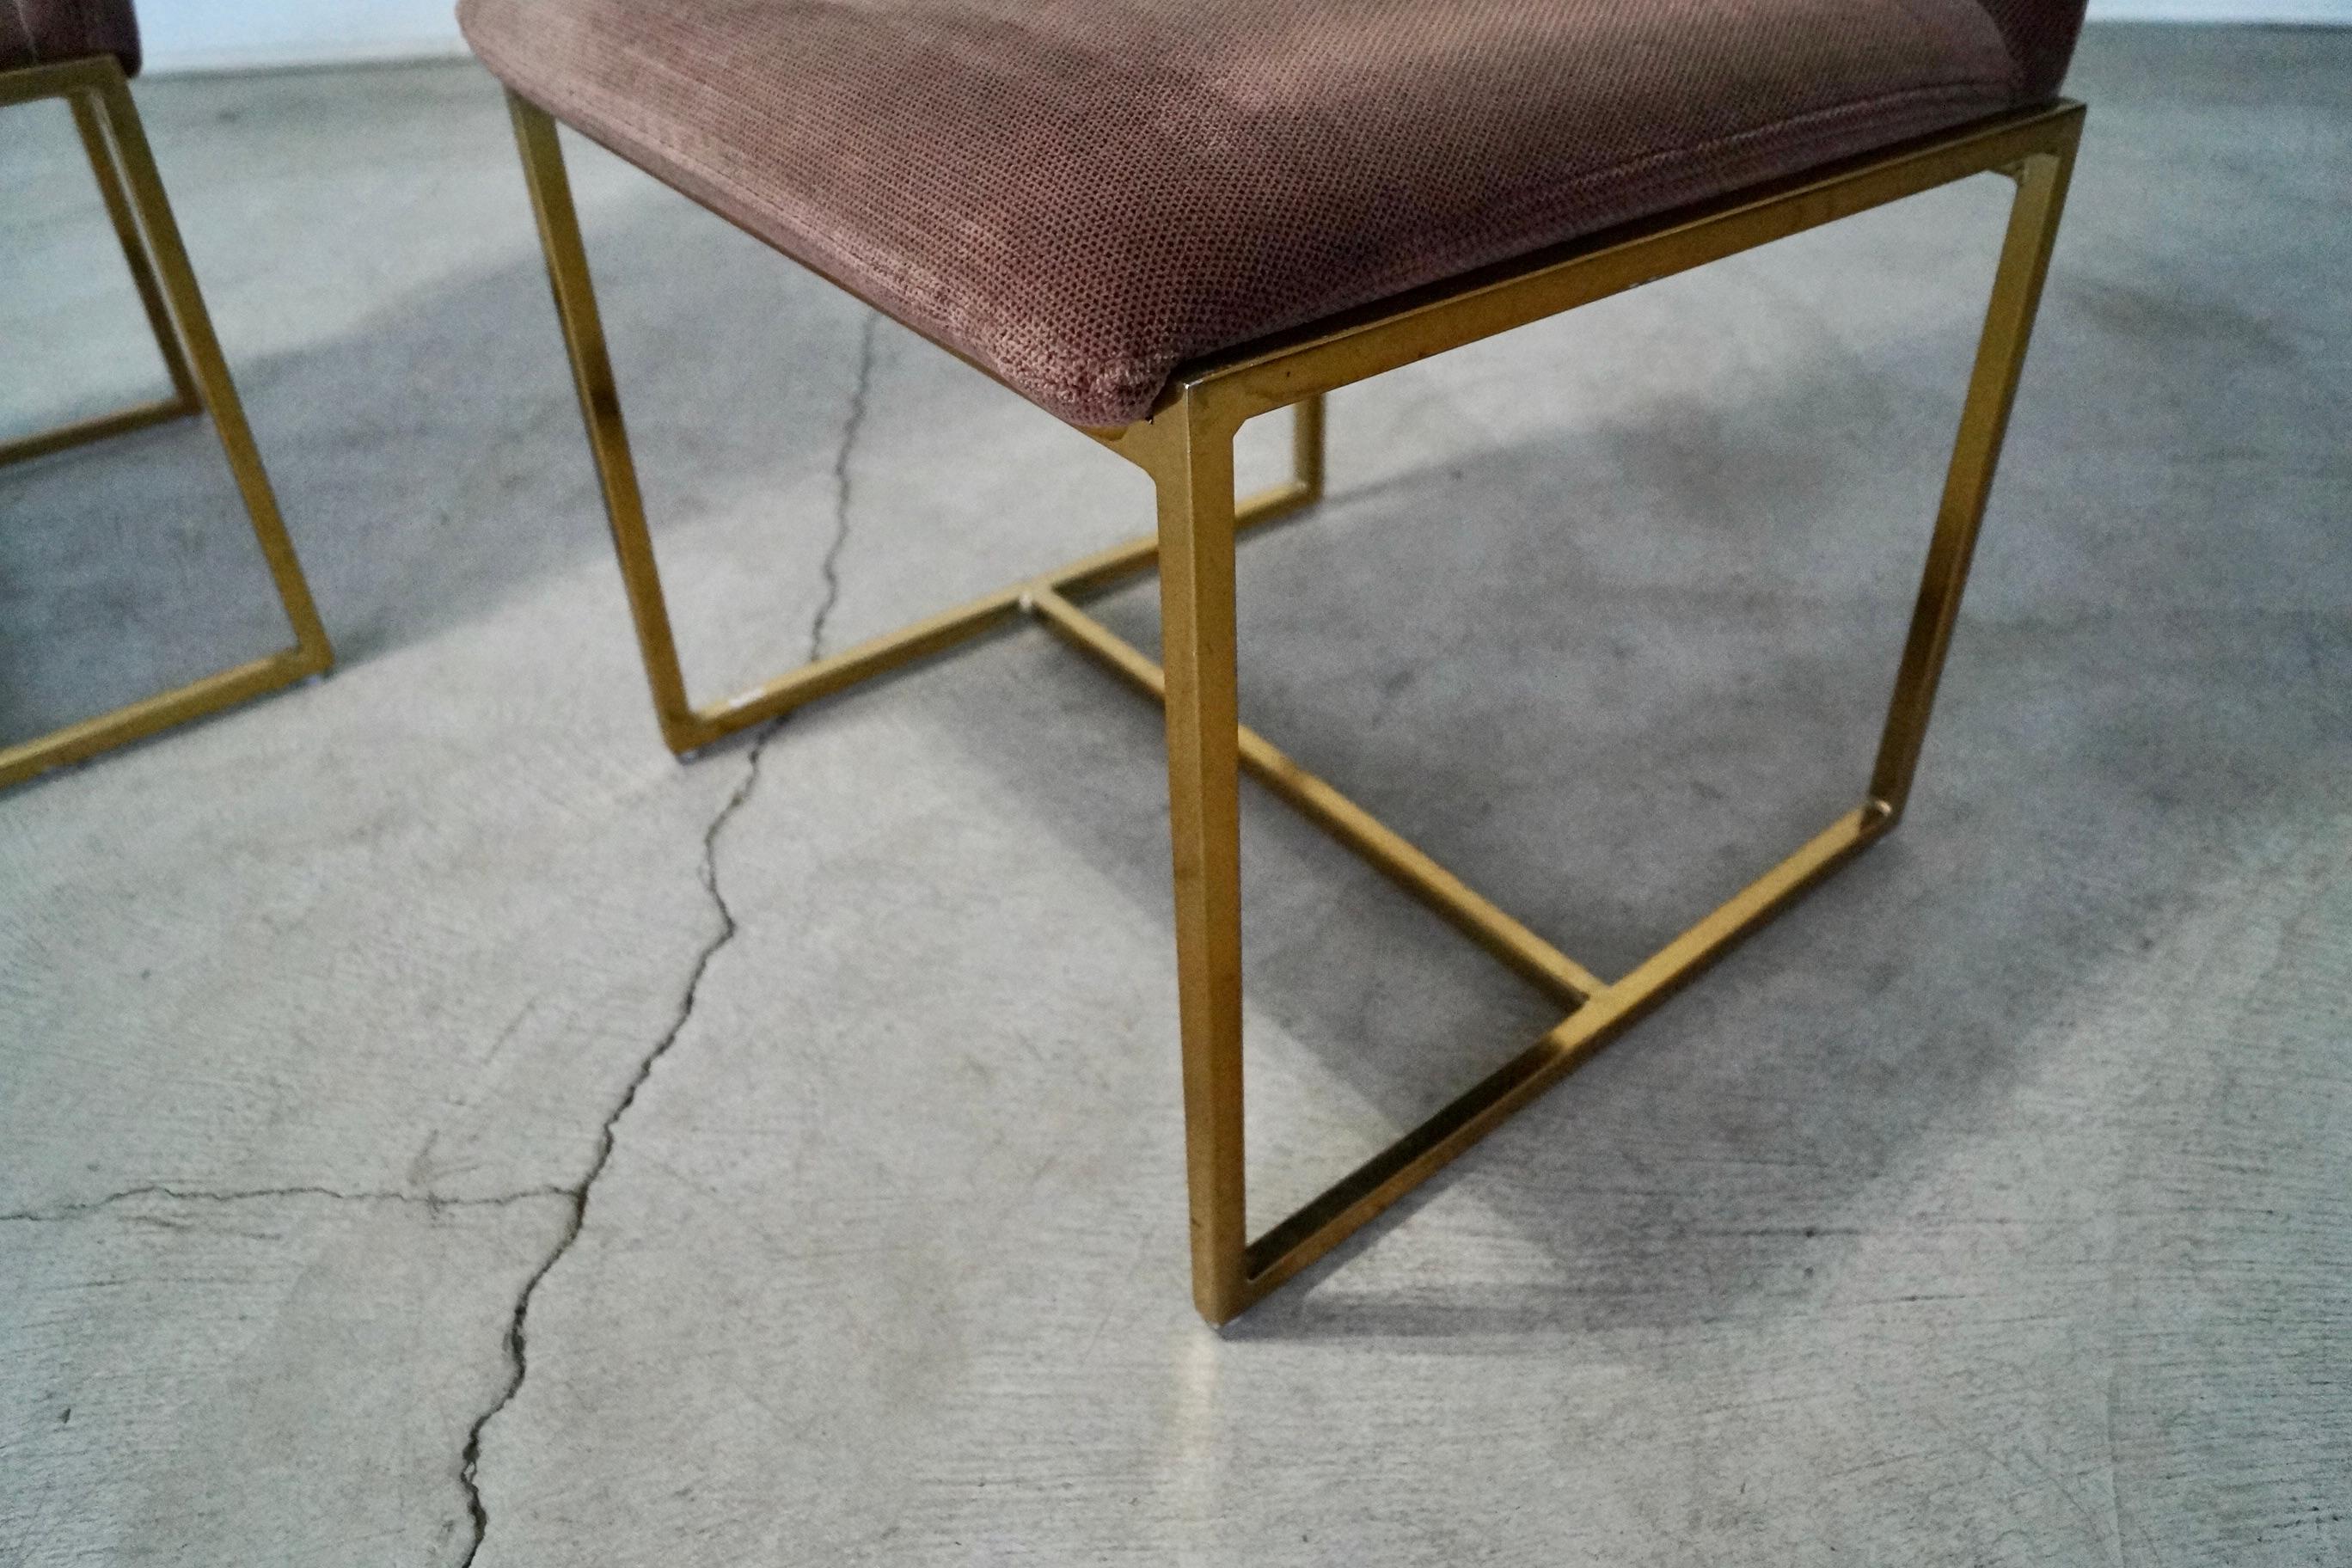 1970's Mid-Century Modern Milo Baughman Style Brass Dining Chairs - a Pair For Sale 8